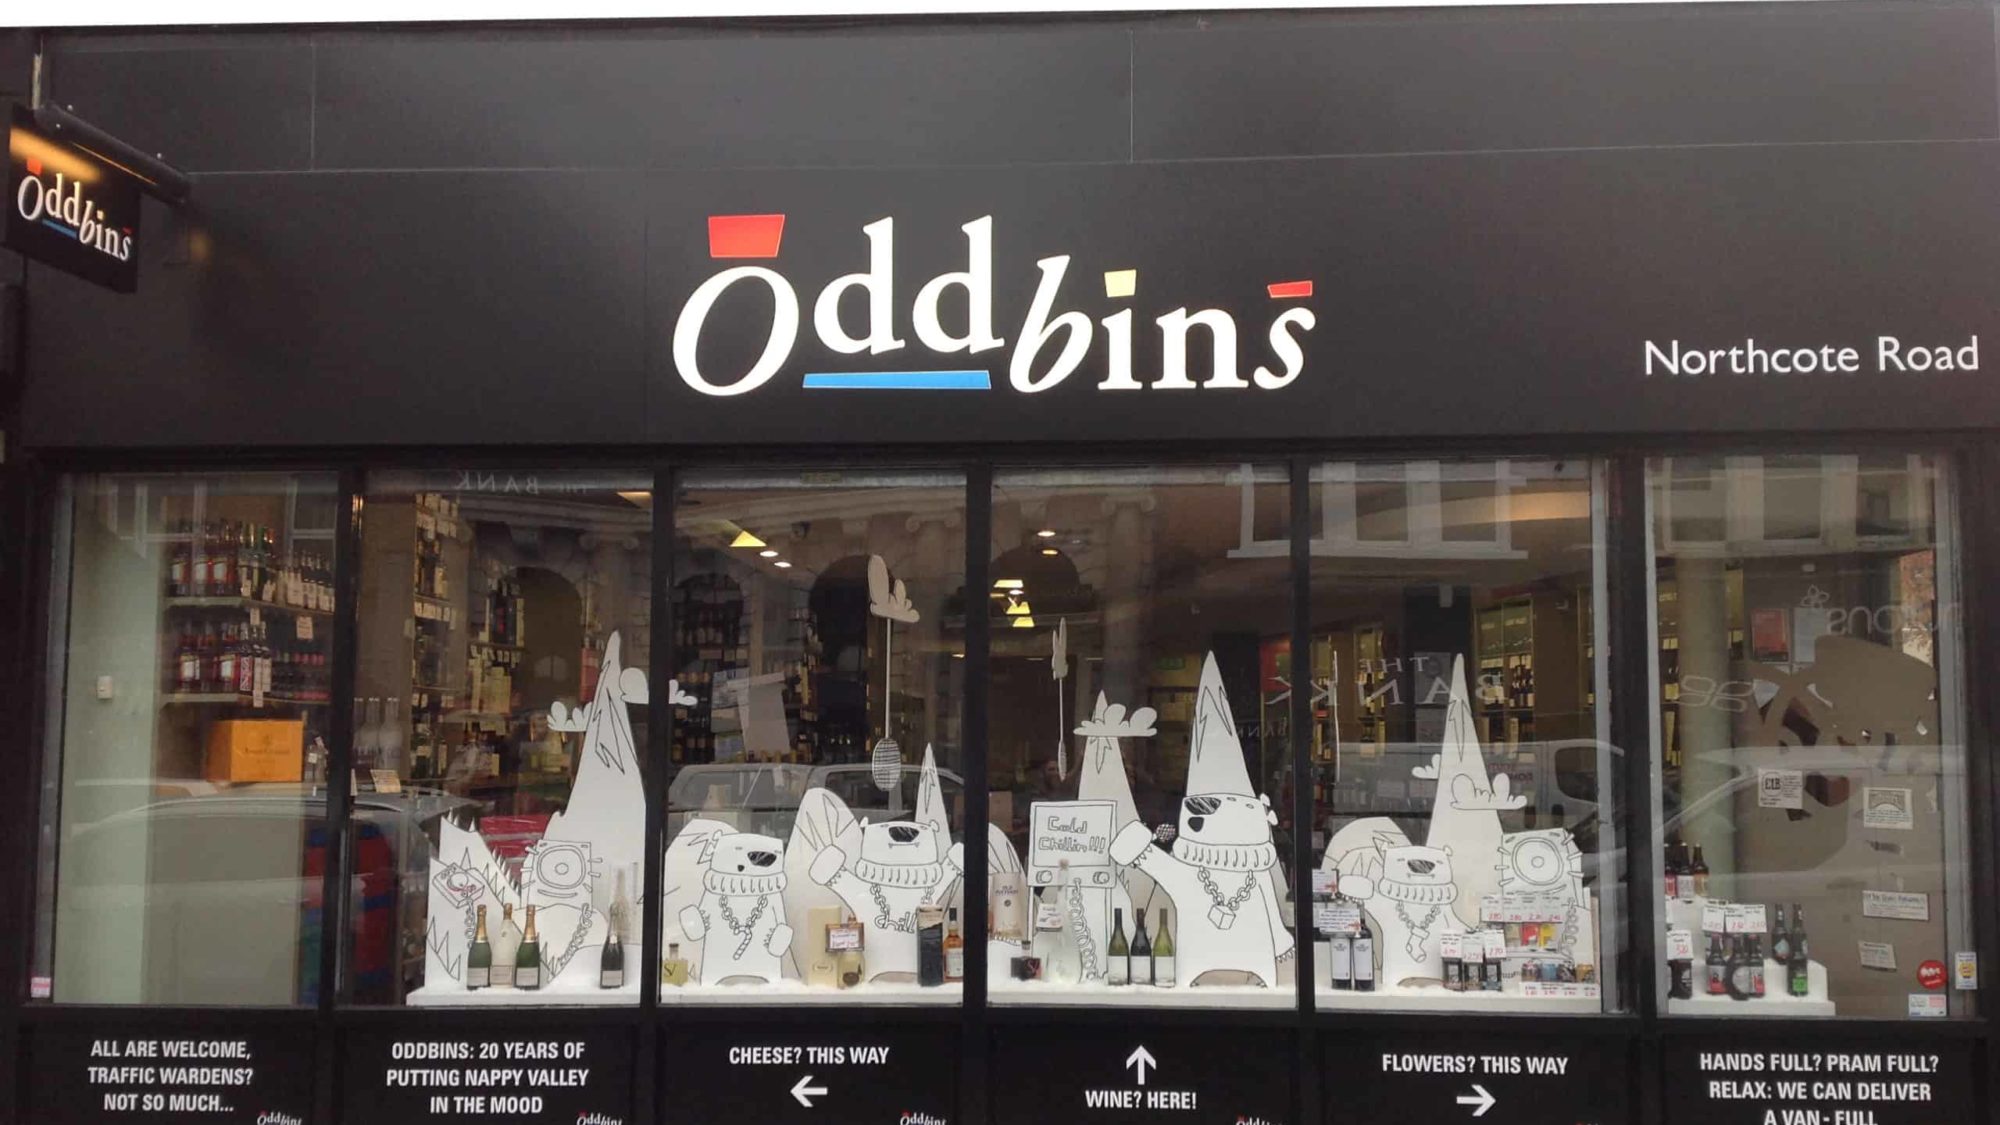 Trouble at Oddbins